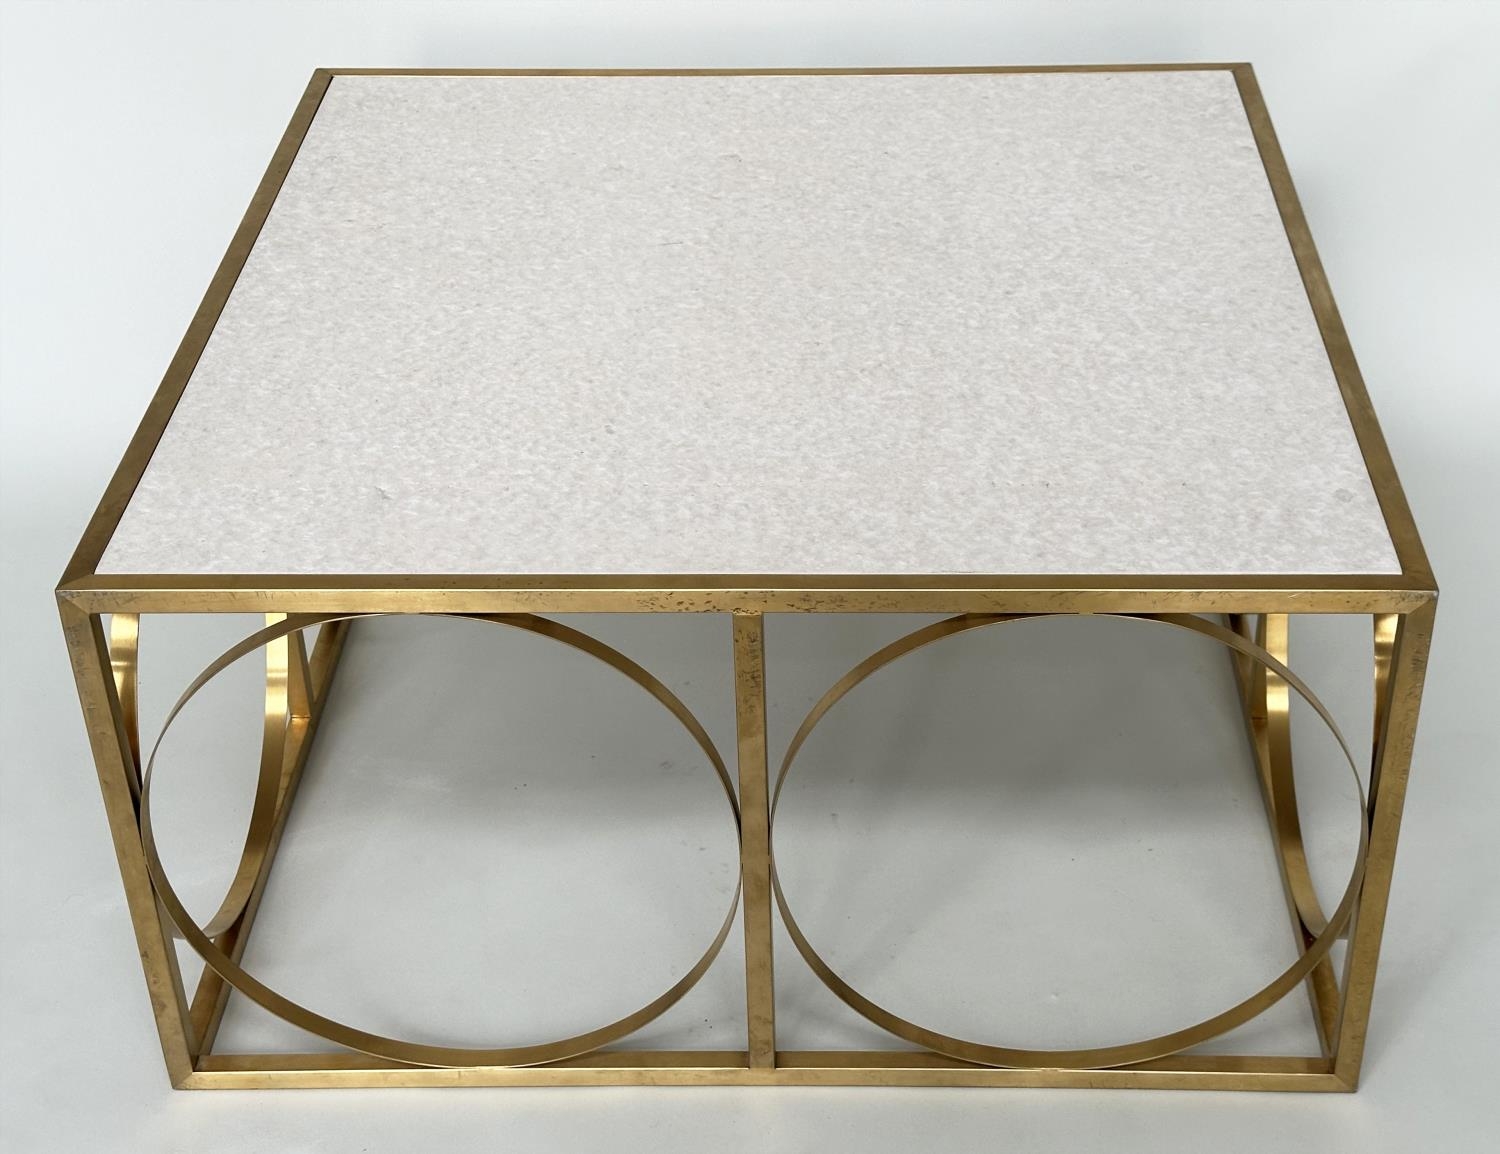 LOW TABLE, square gilded metal framed with reconstituted travertine marble, 88cm x 88cm x 45cm H. - Image 3 of 6